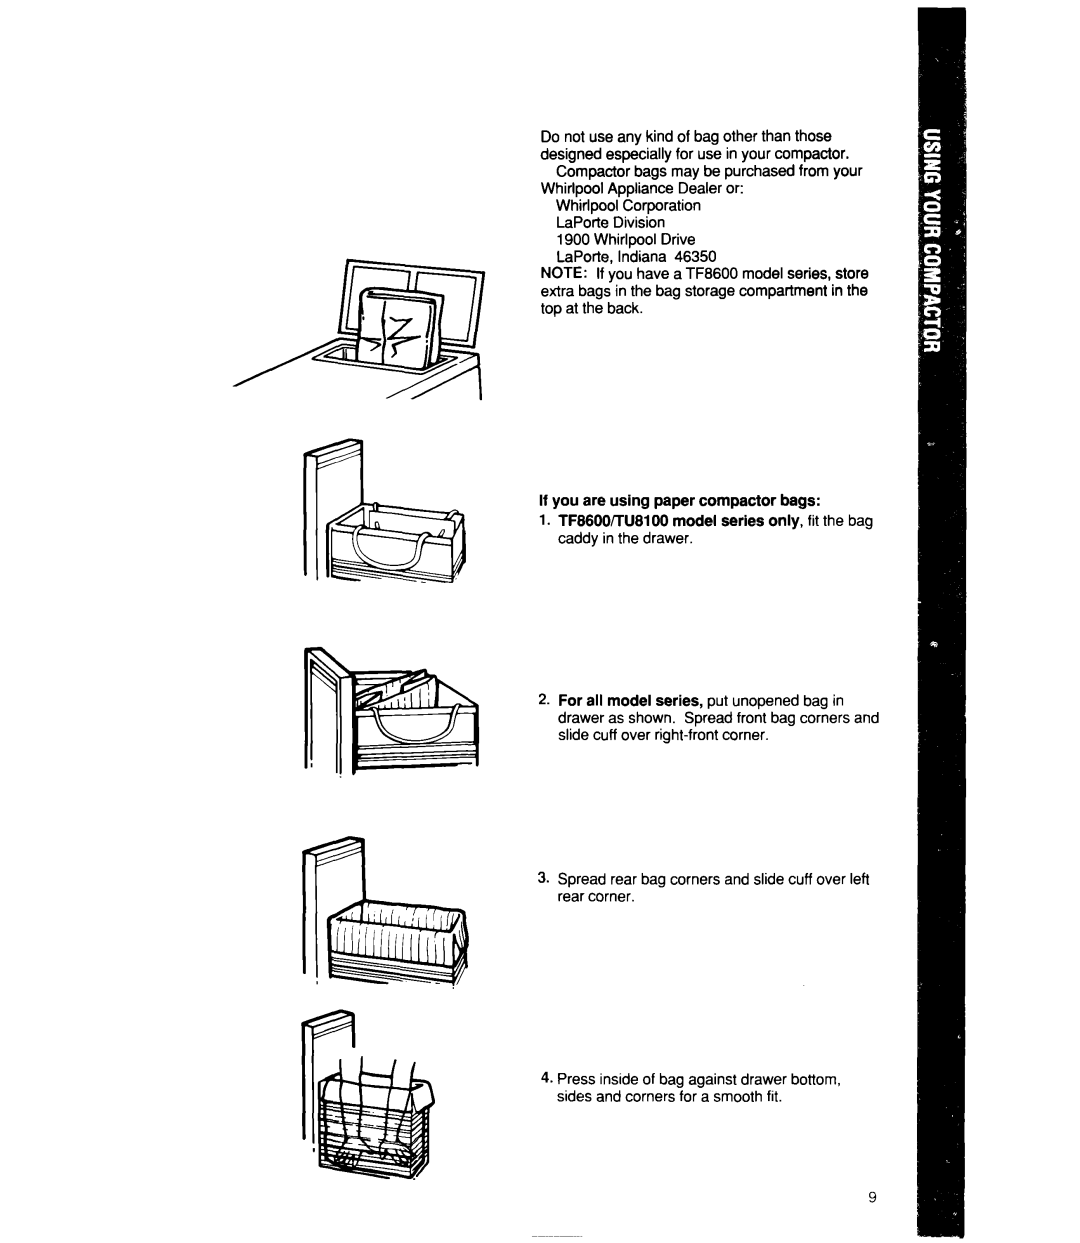 Whirlpool TUSIOOX, TU4100X, TF4600X, TFSGOOX manual If you are using paper compactor bags 